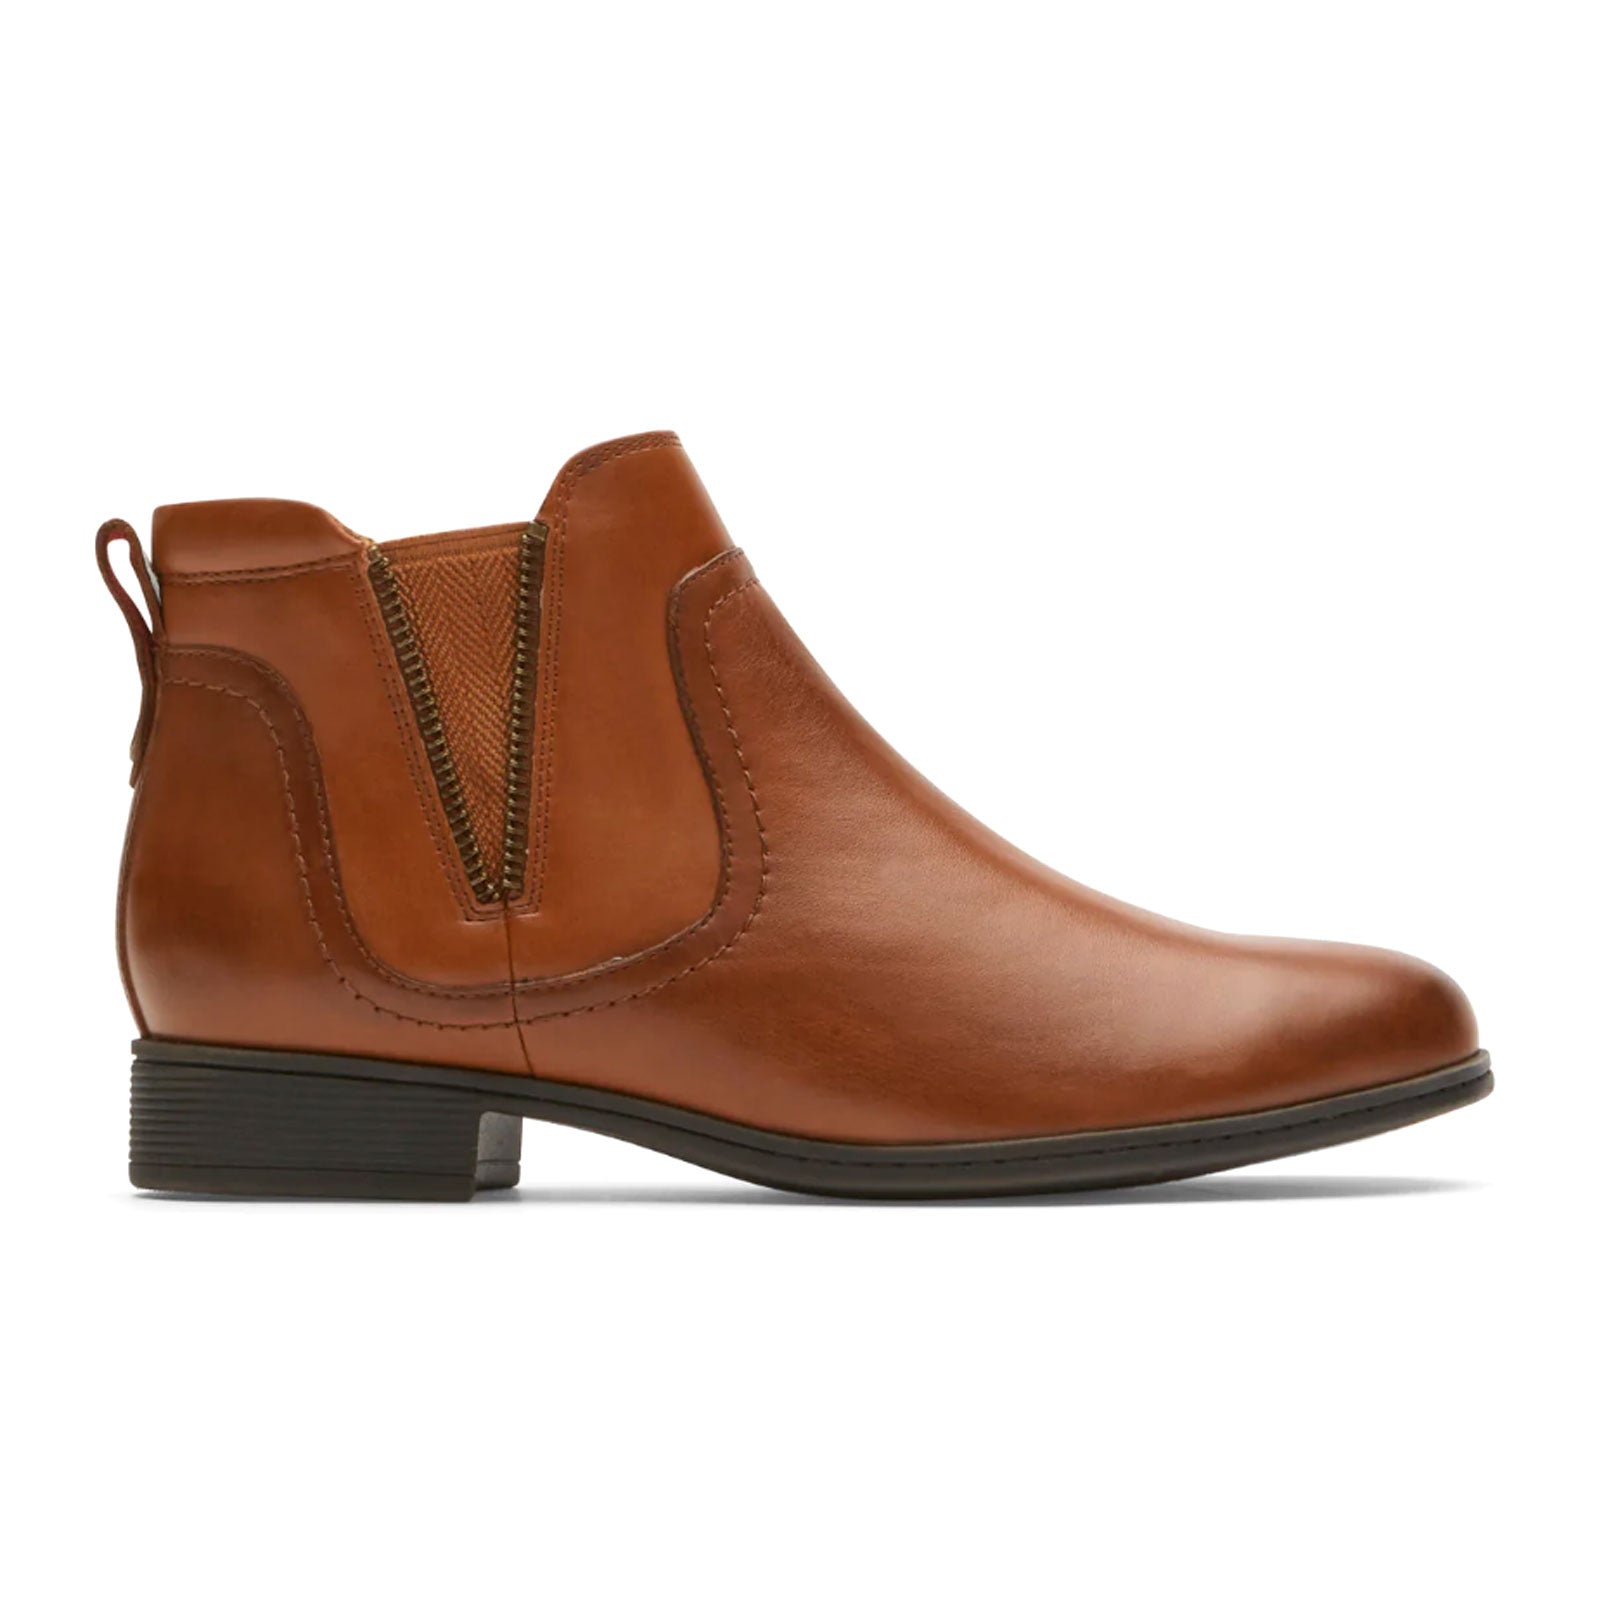 Cobb Hill Crosbie Gore Boot (Women) - Toffee Tan Leather